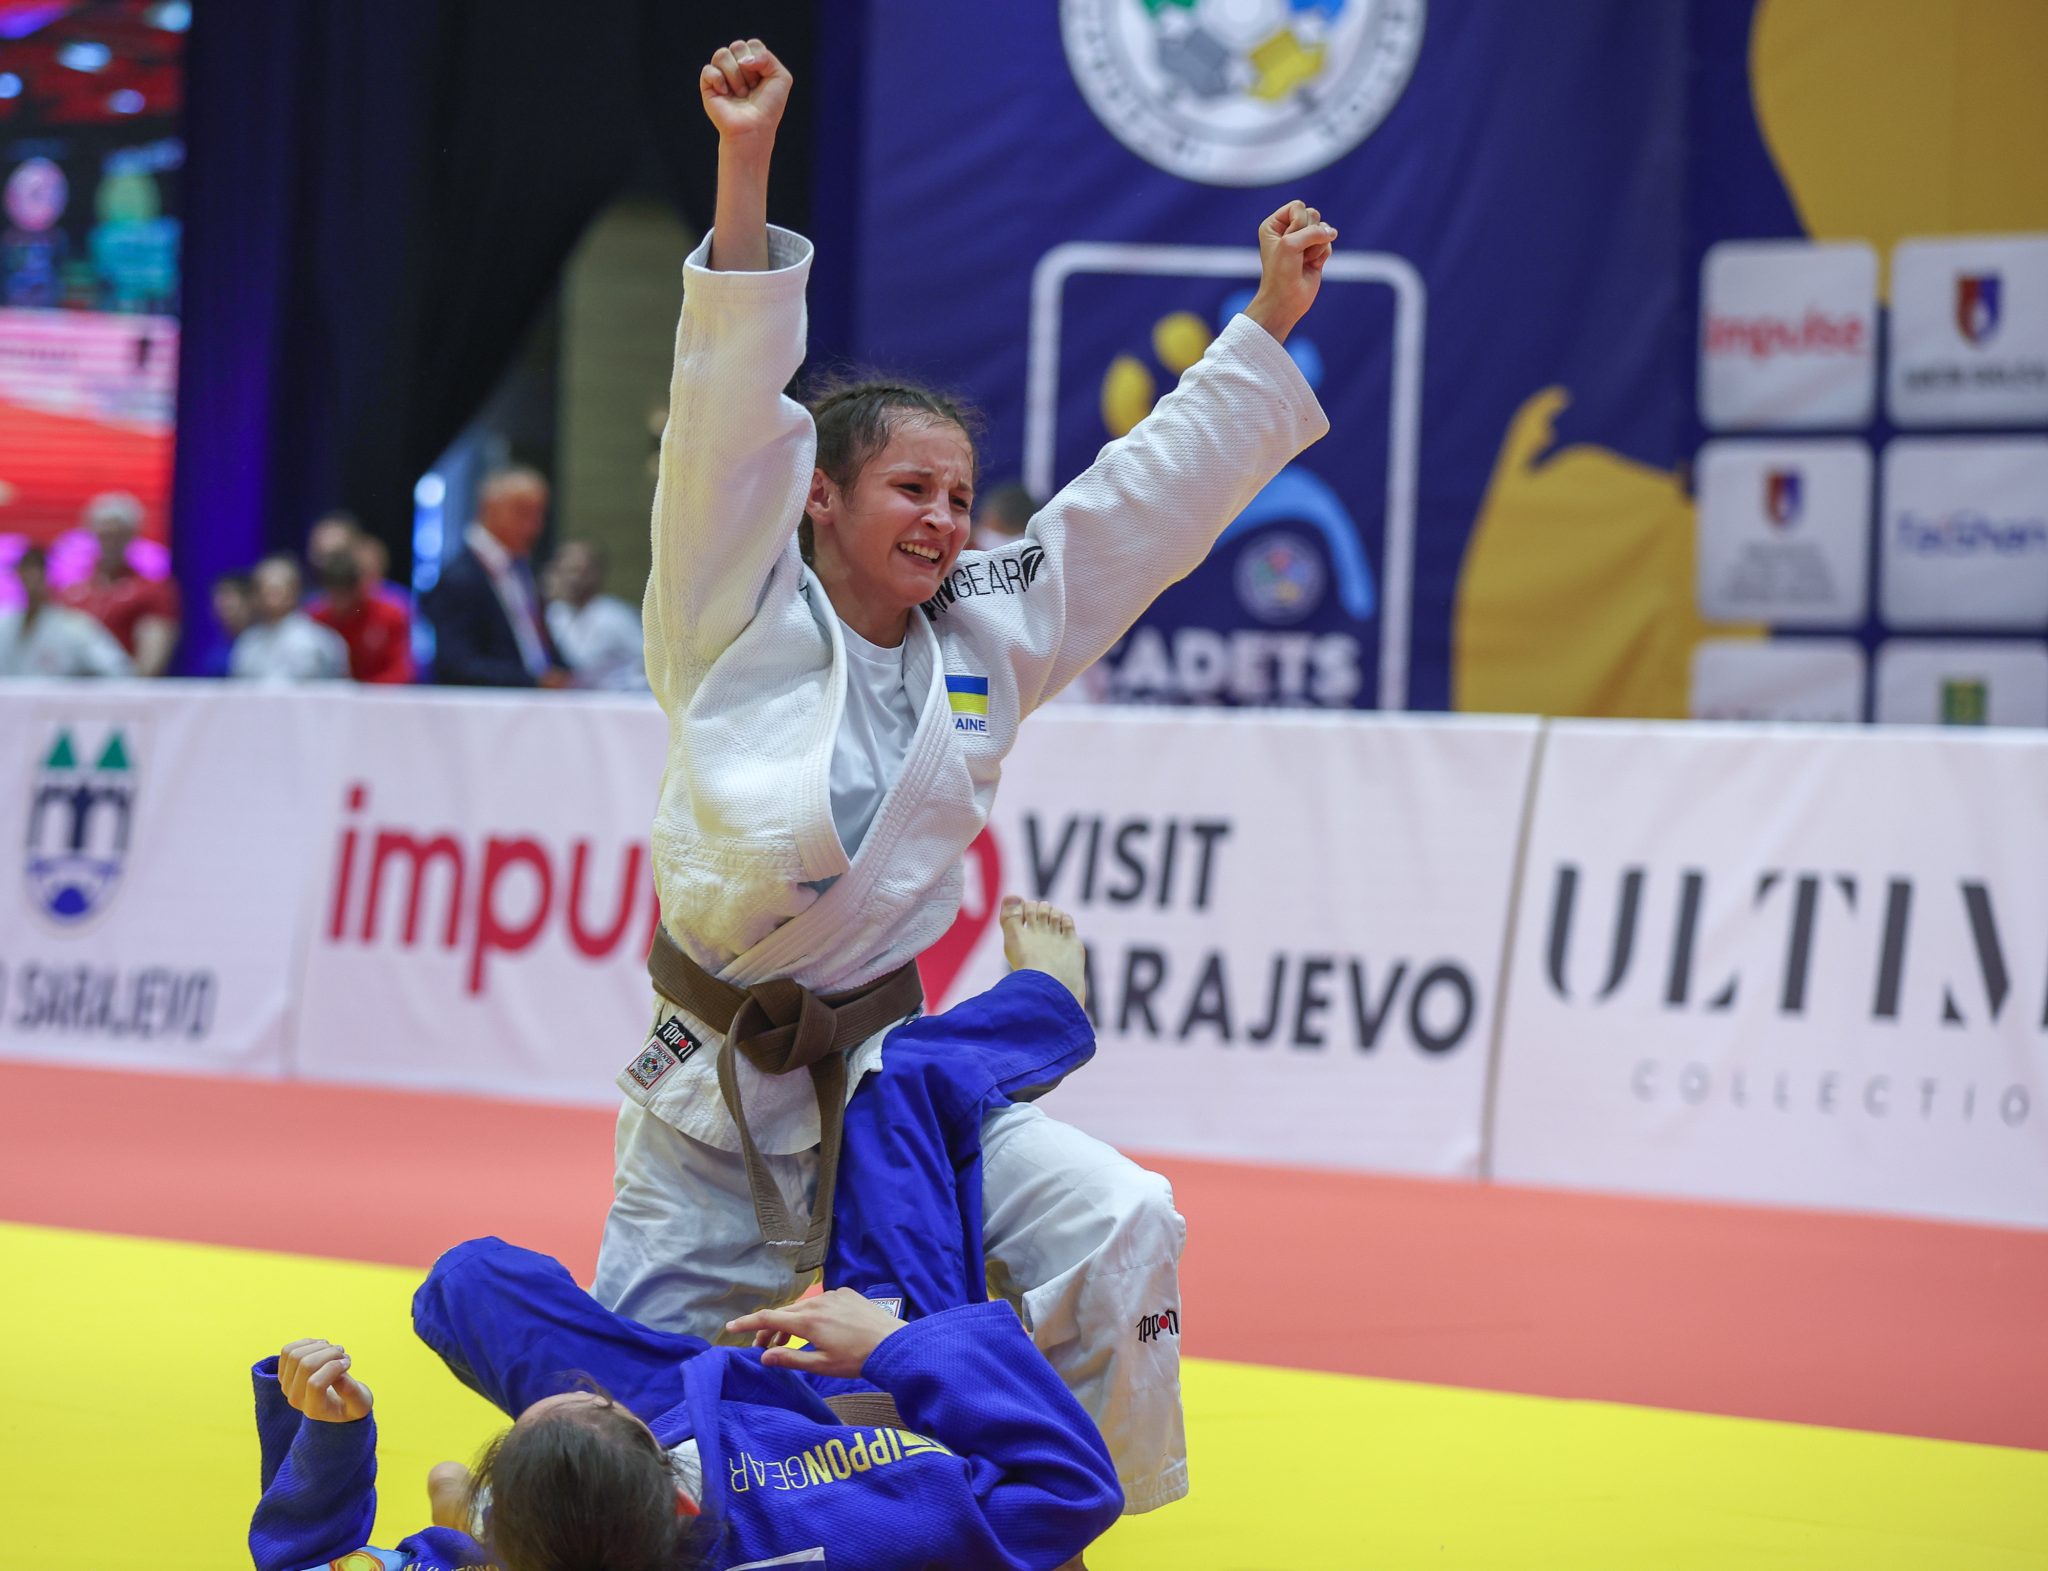 ALL-EUROPEAN FINALS ON DAY ONE OF CADET WORLD CHAMPIONSHIPS 2022